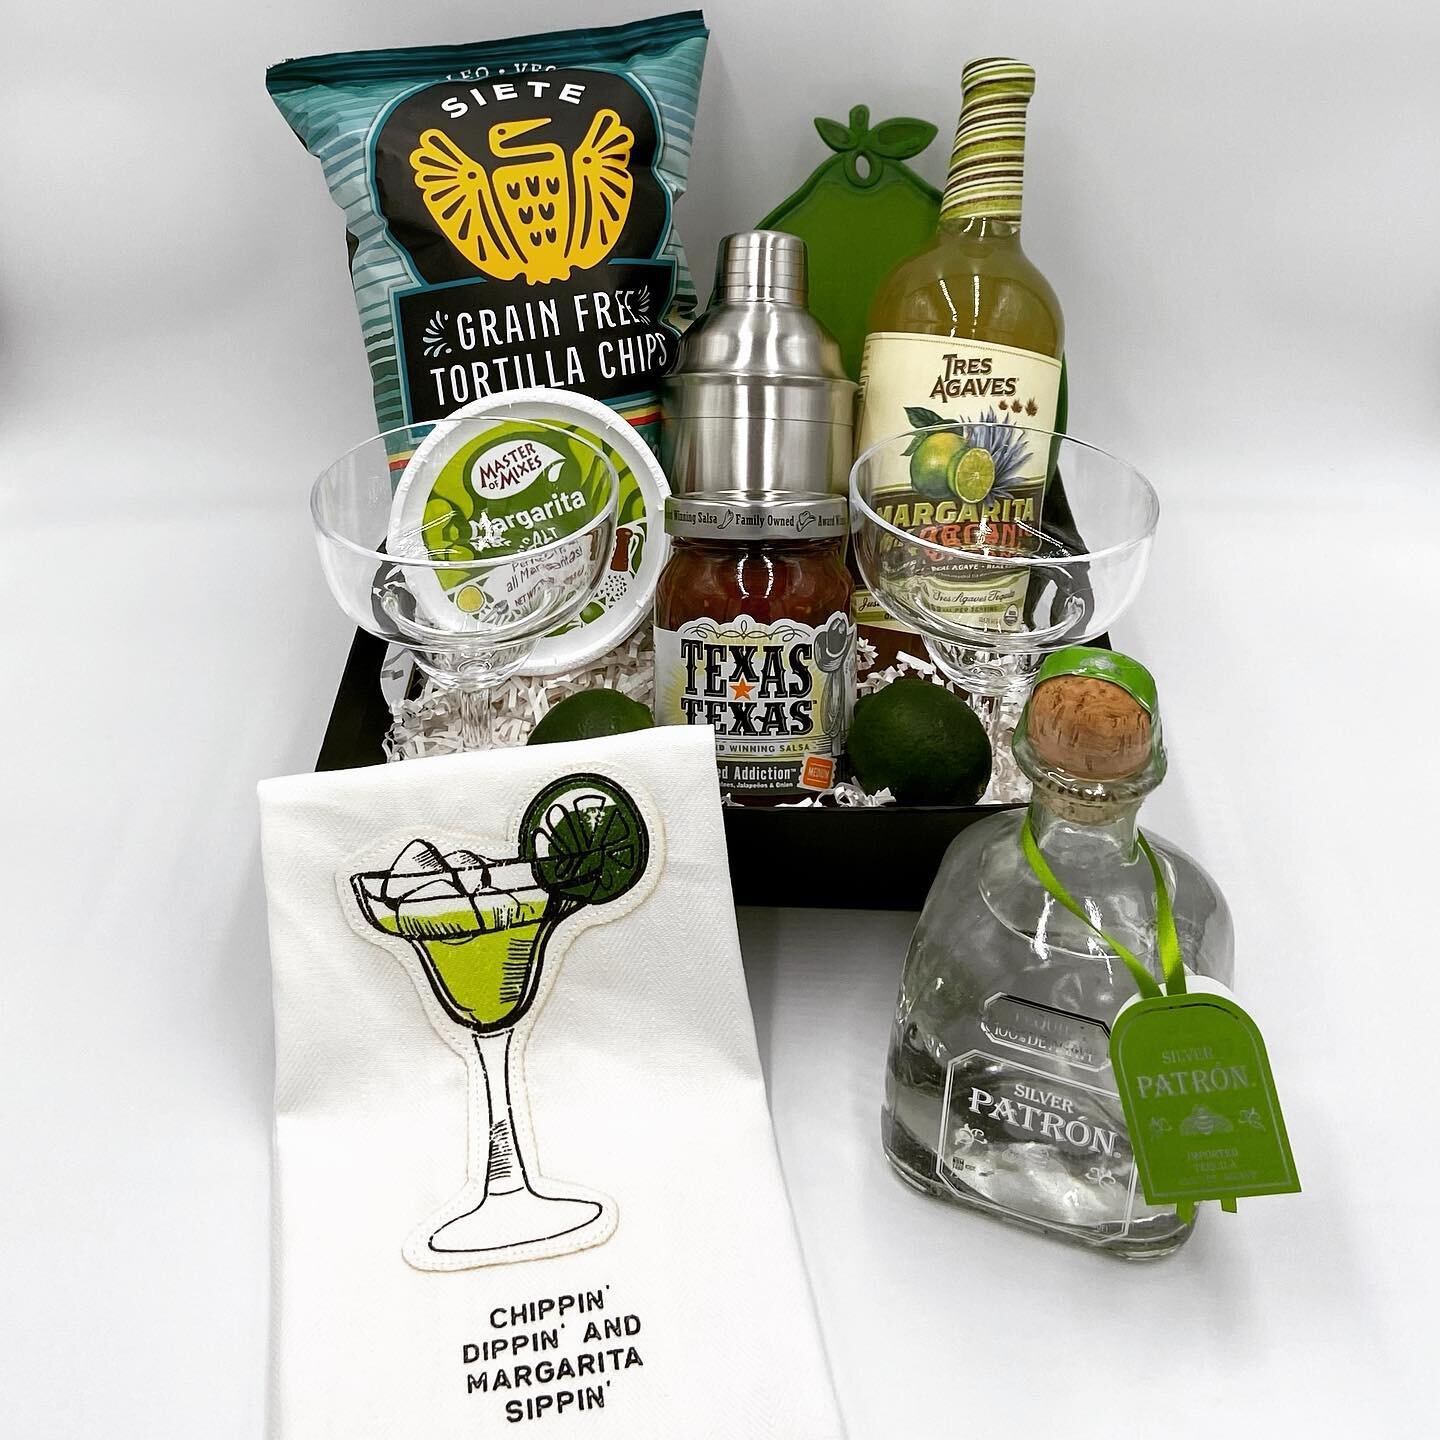 Surprise your favorite margarita lover this Cinco de Mayo with our Margarita Gift Basket! Link in profile! #cincodemayo #celebration #party #mexico #austin #texas #gift #giftideas